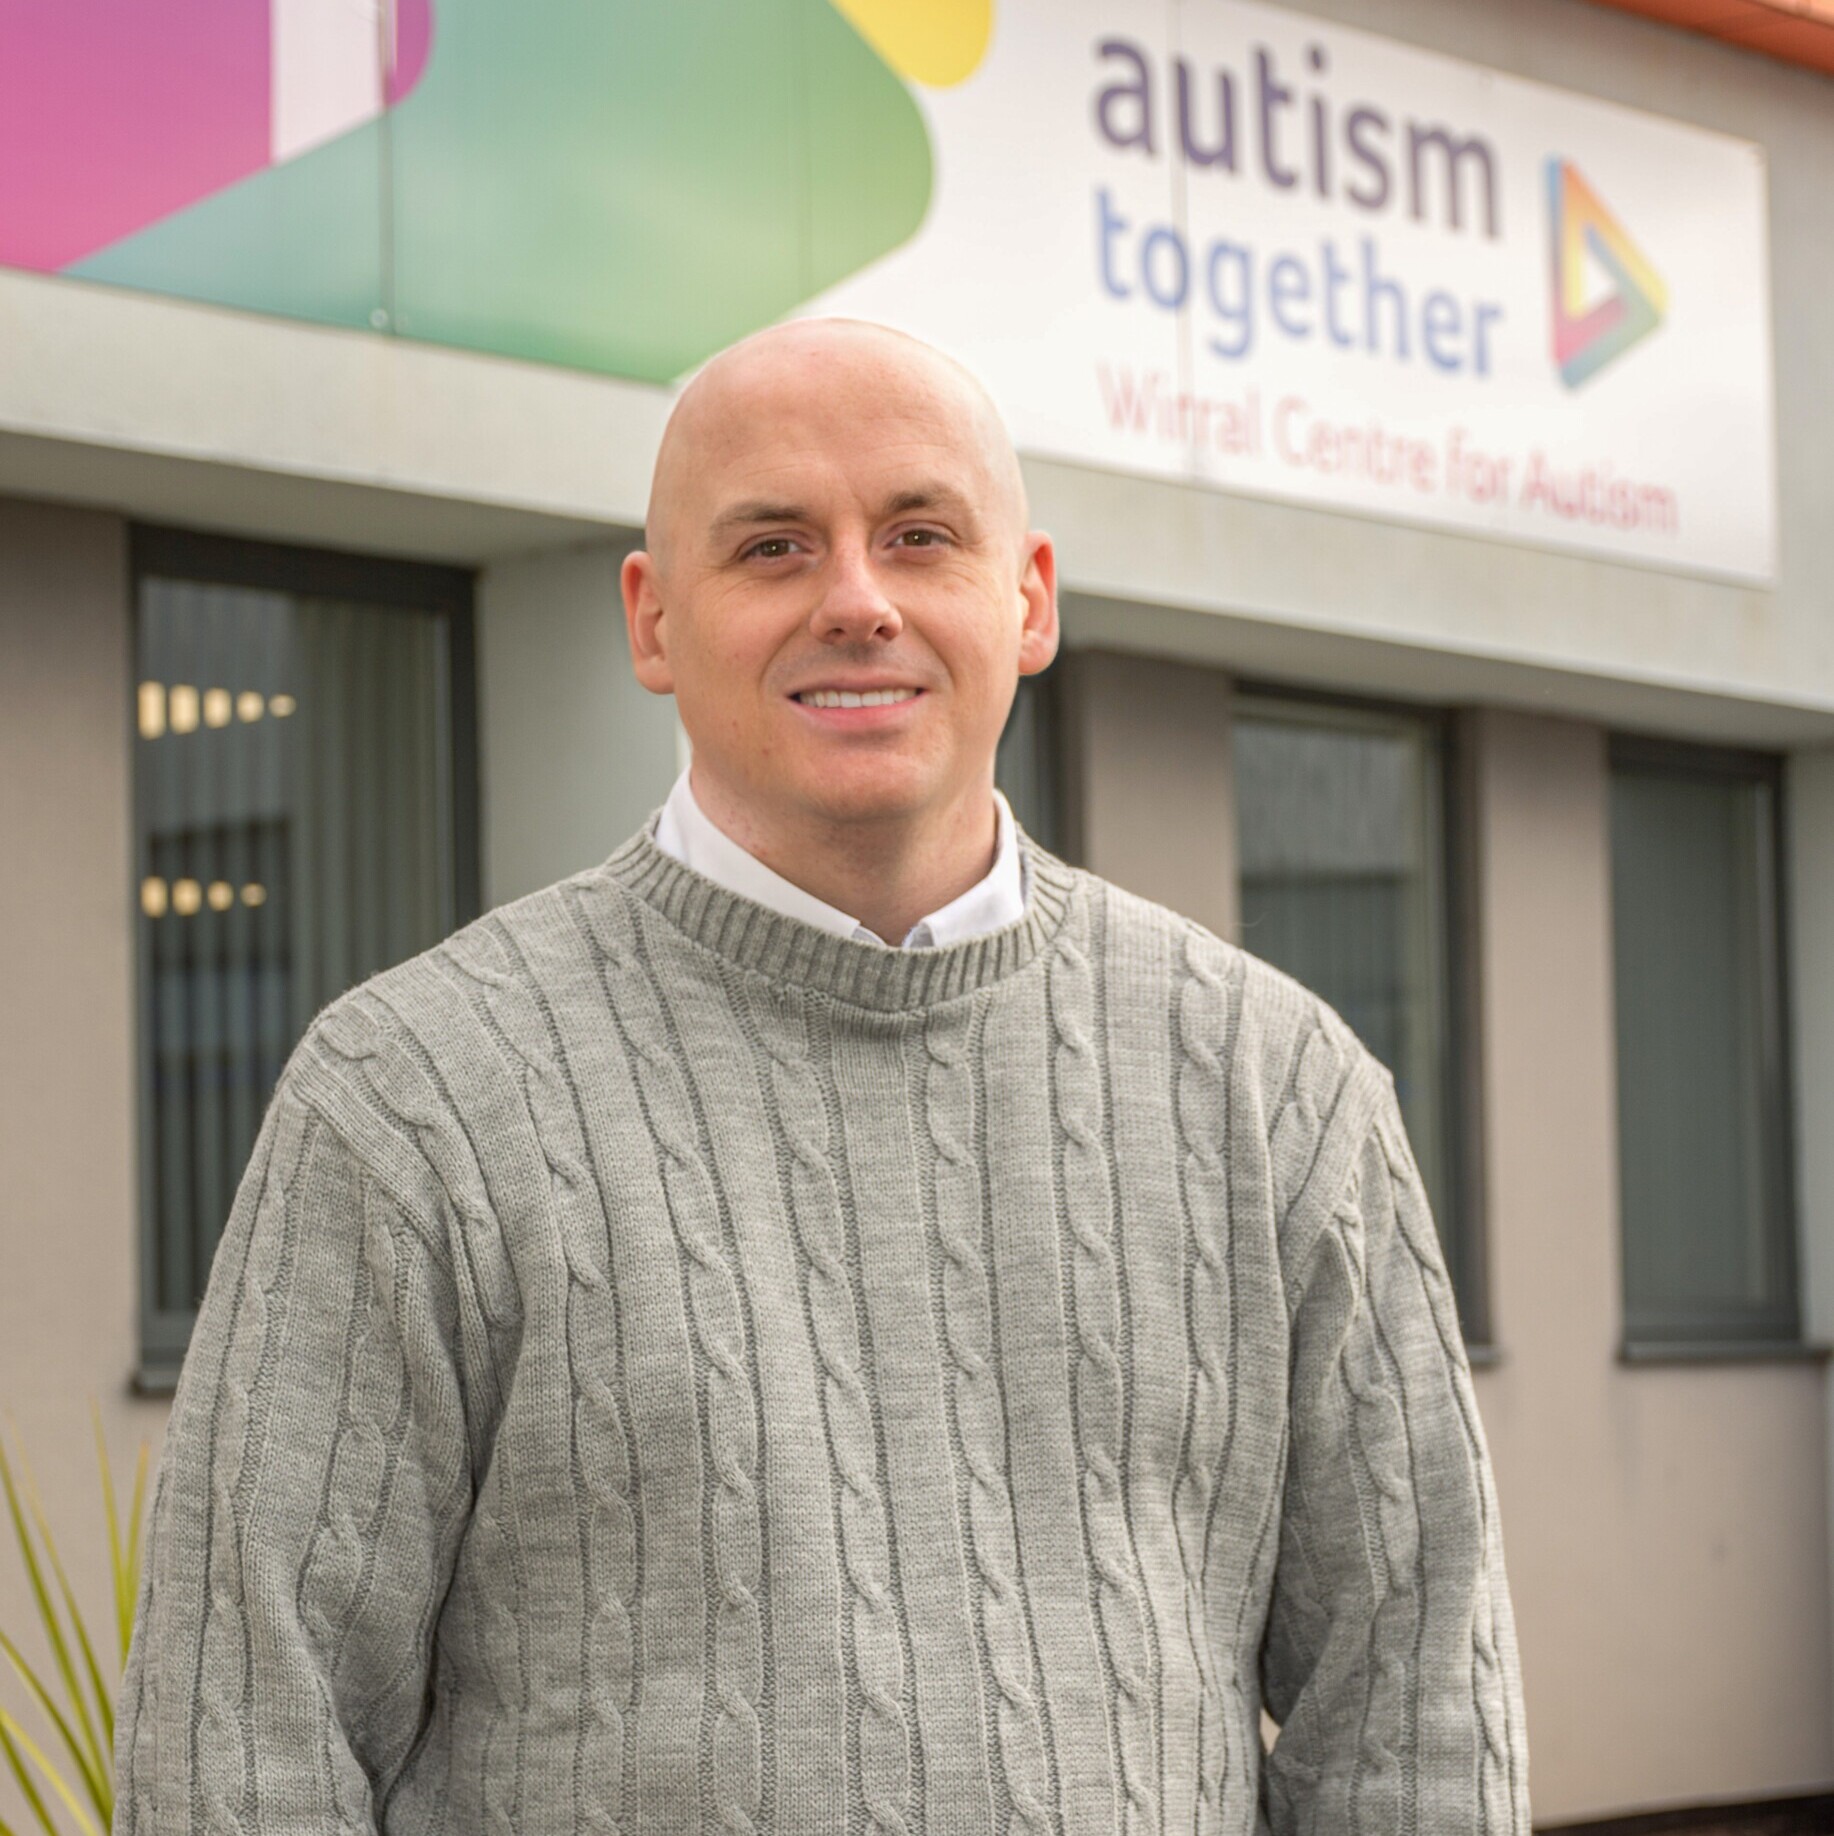 Autism Together's new CEO Richard Whitby outside the head office